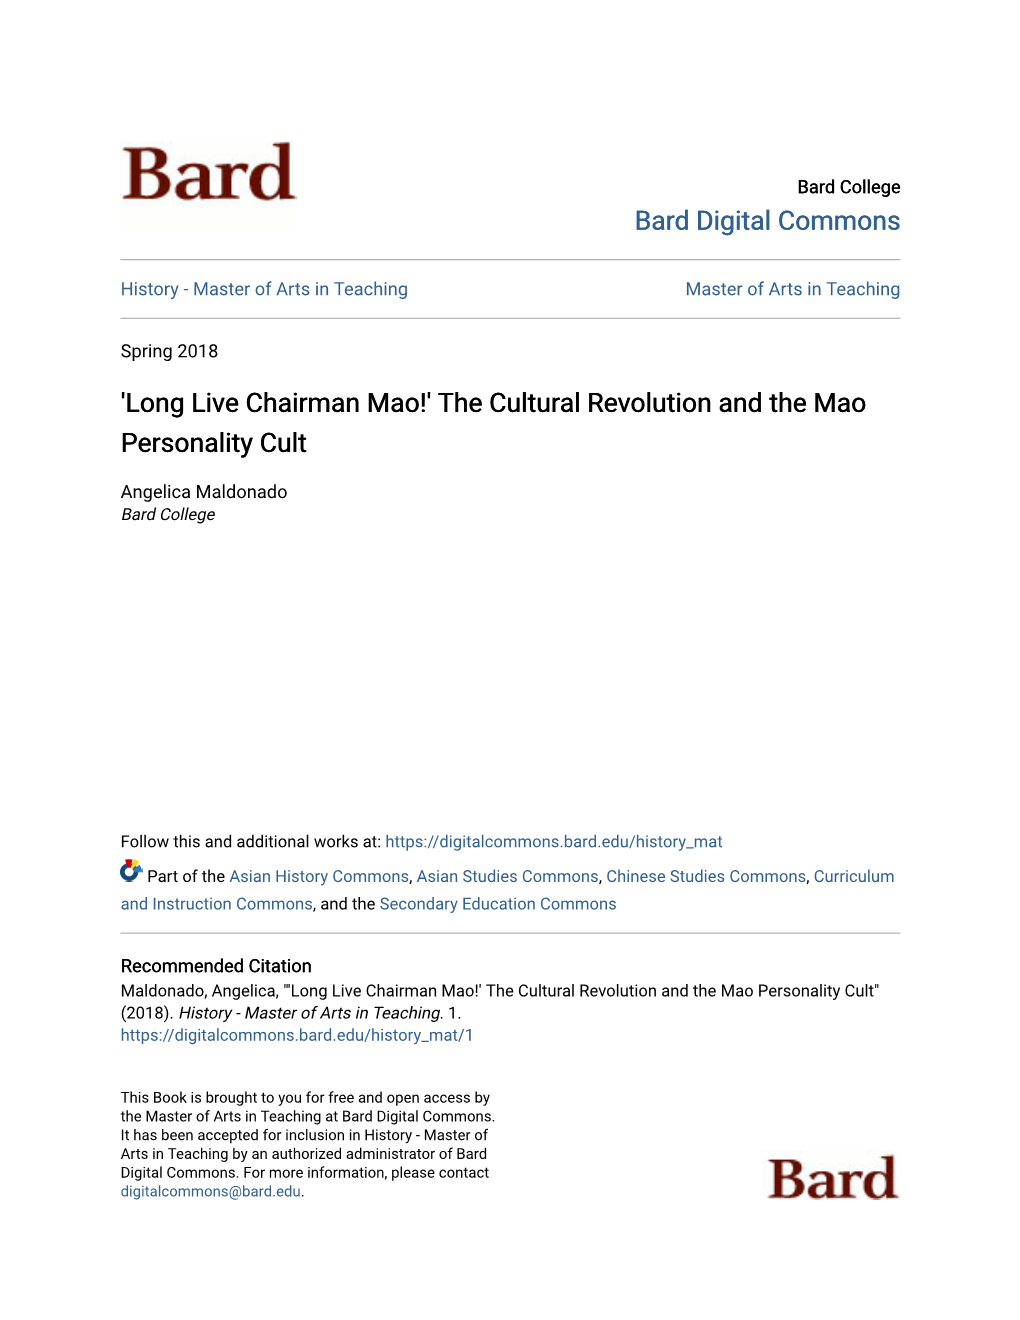 The Cultural Revolution and the Mao Personality Cult